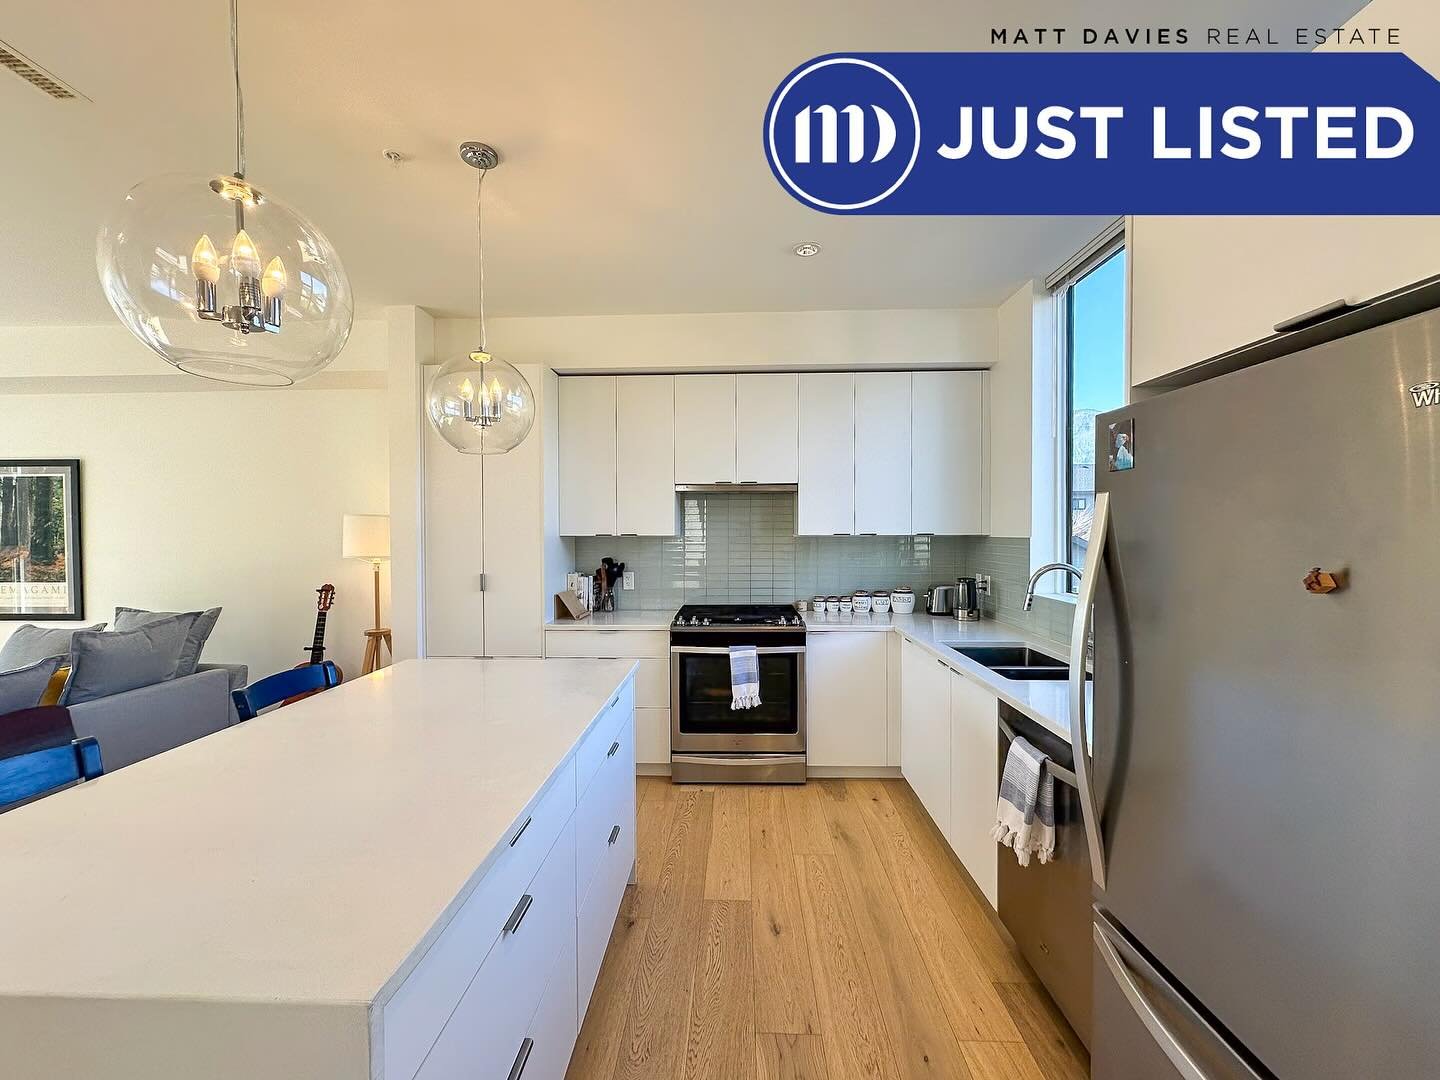 Beautiful Townhome in Squamish!

📍 6 38447 Buckley
🗺️ Squamish BC
🛏️ 3 Bed
🛁 2.5 Bath
📐 1577 sq ft
☀️ Rooftop patio
🚘 Double wide garage
🌳 3 private outdoor spaces
🏔️ Mountain views
🔥 Natural gas fireplace and range
💰 Listed at $1,249,000

